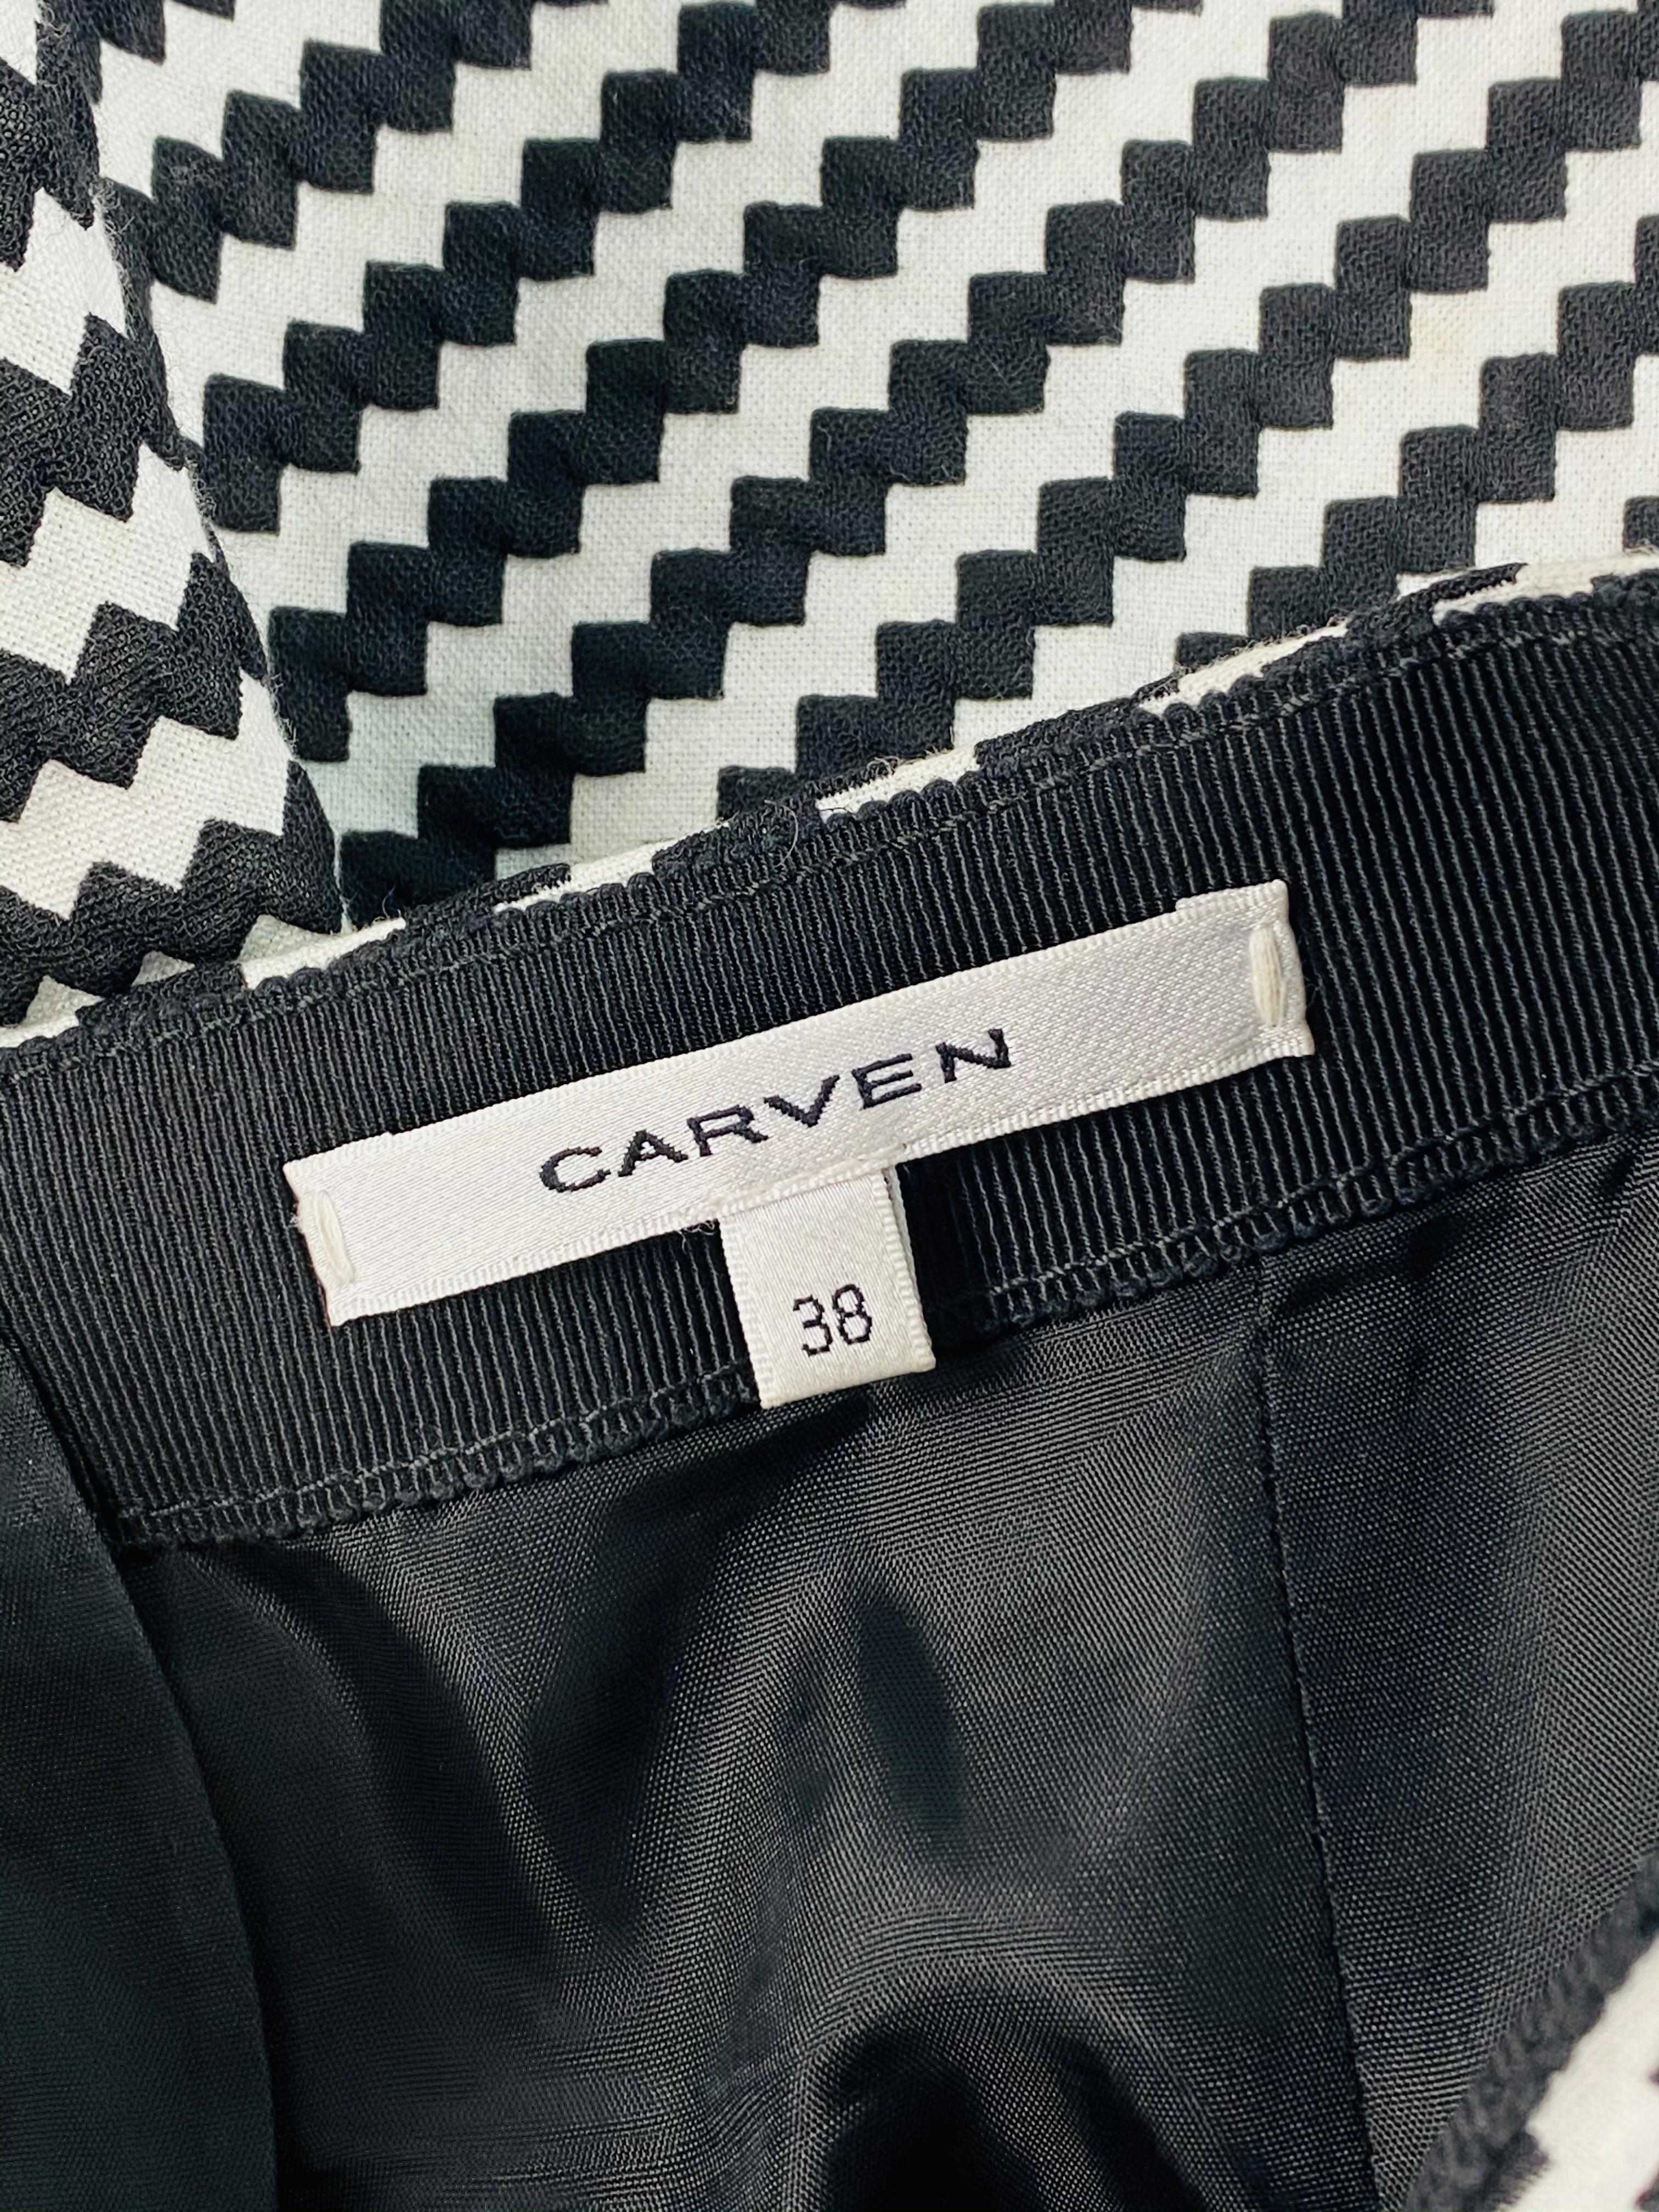 Women's Carven Black and White Shorts, Size 38 For Sale